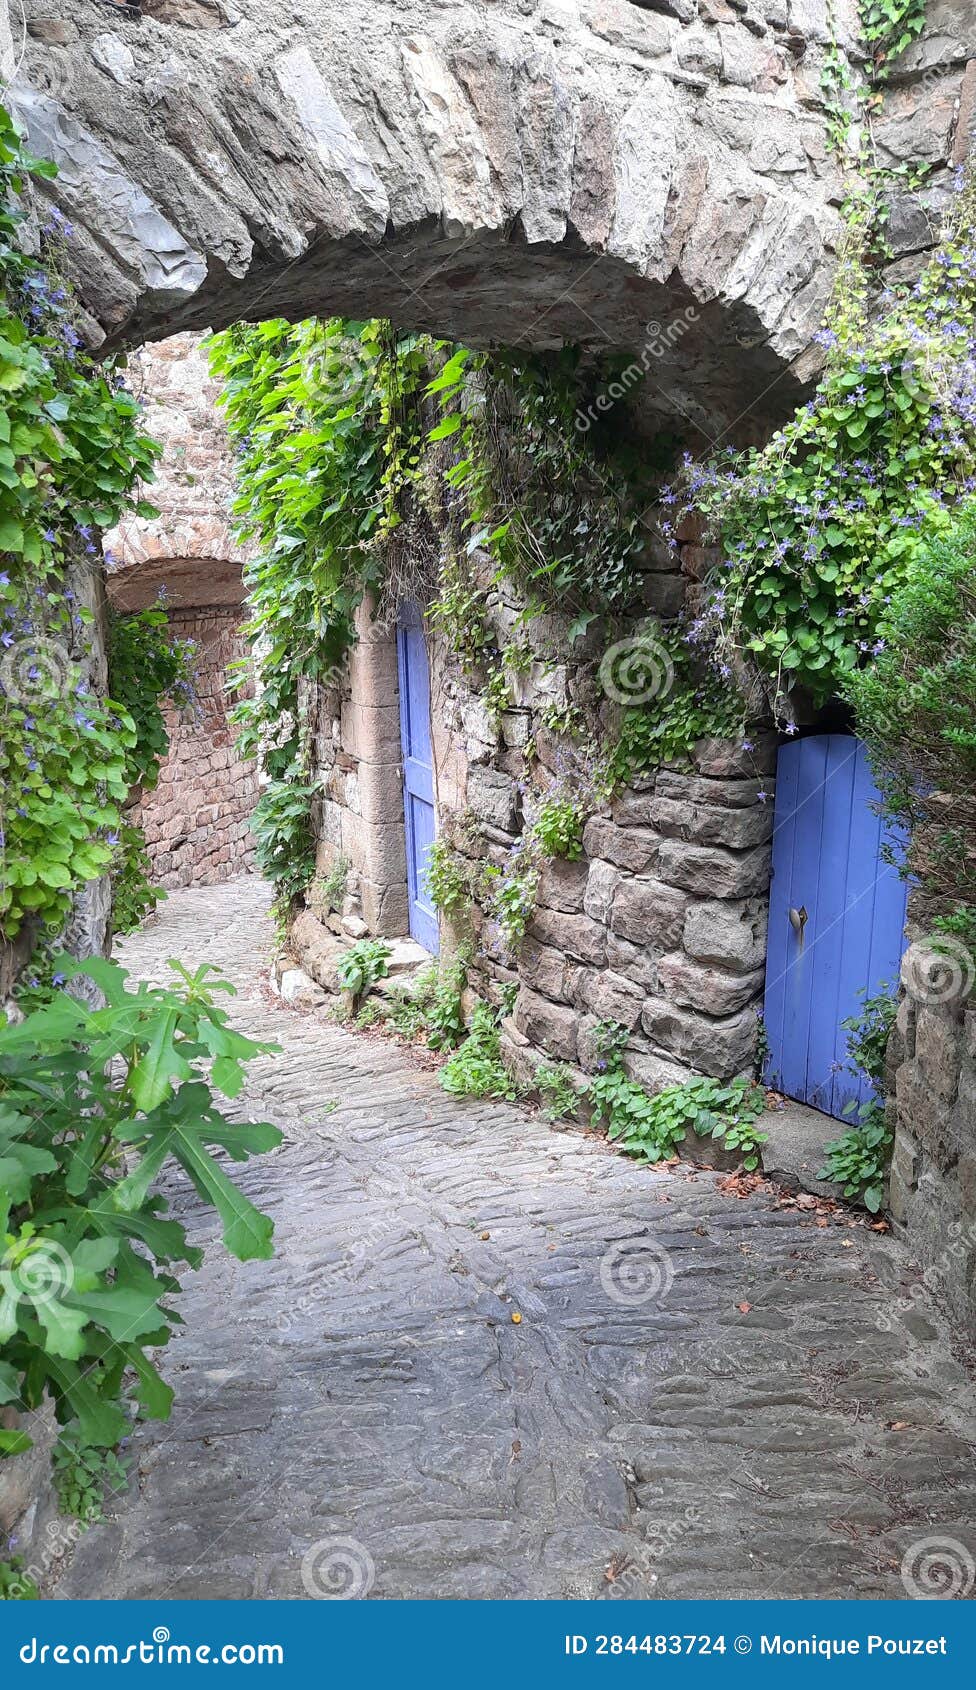 in the stone and cobblestone village of naves